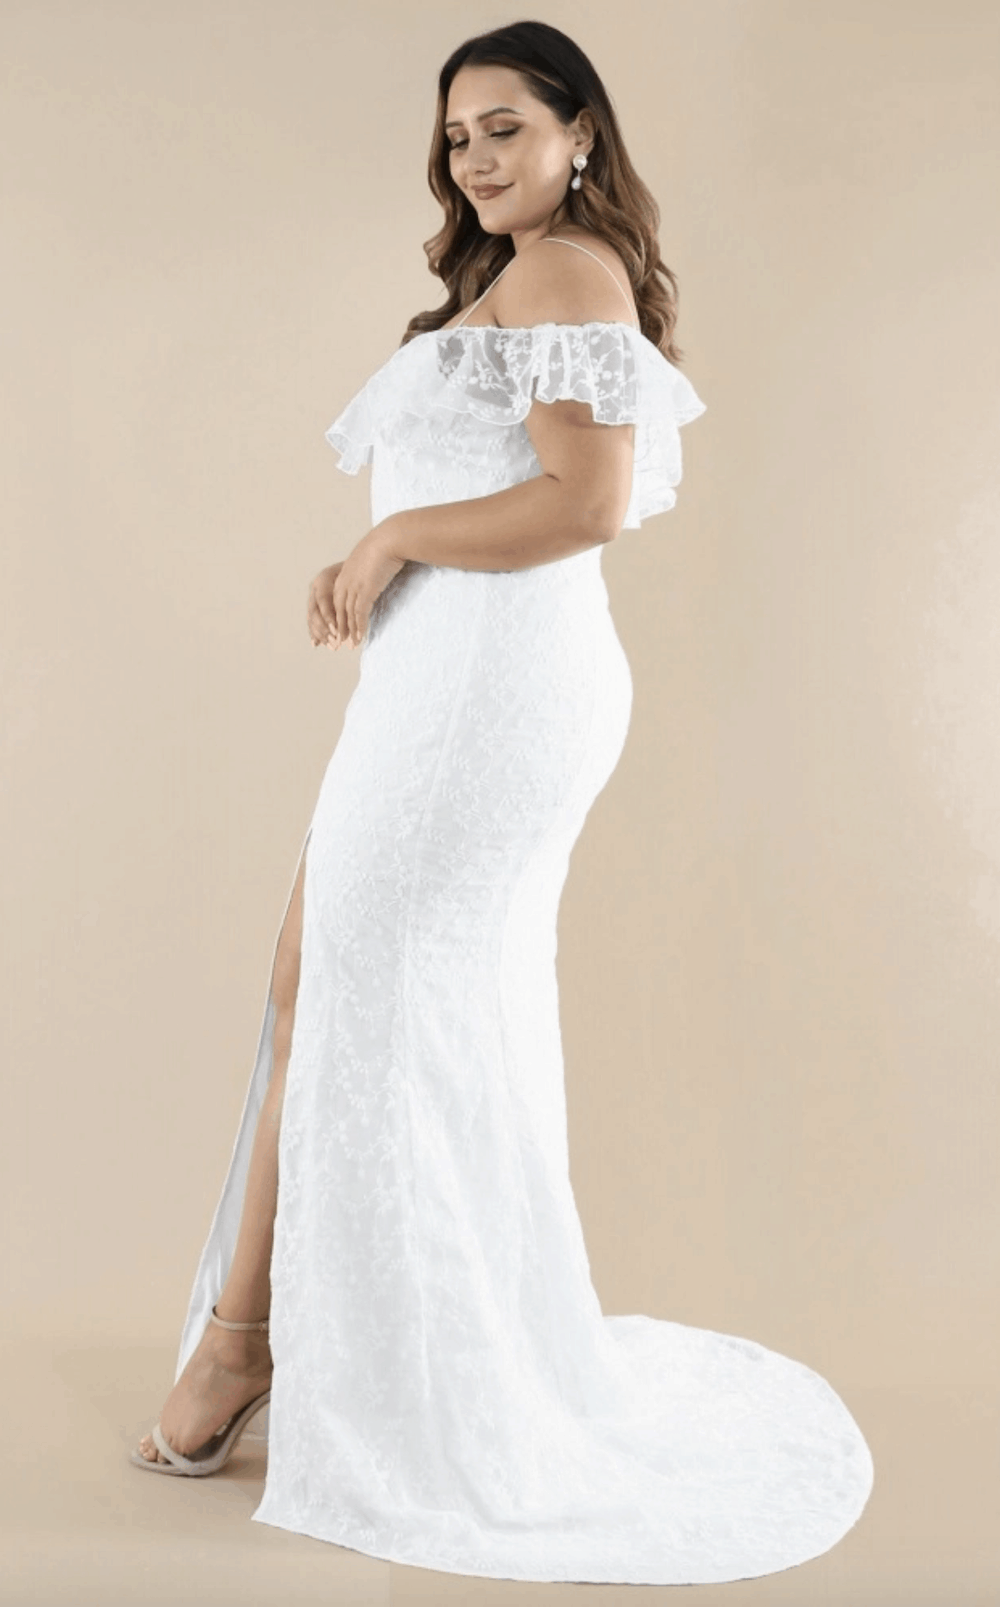 Plus Size Bridal Gowns and Wedding Dresses Perfect for Curvy Brides Off Shoulder Lace